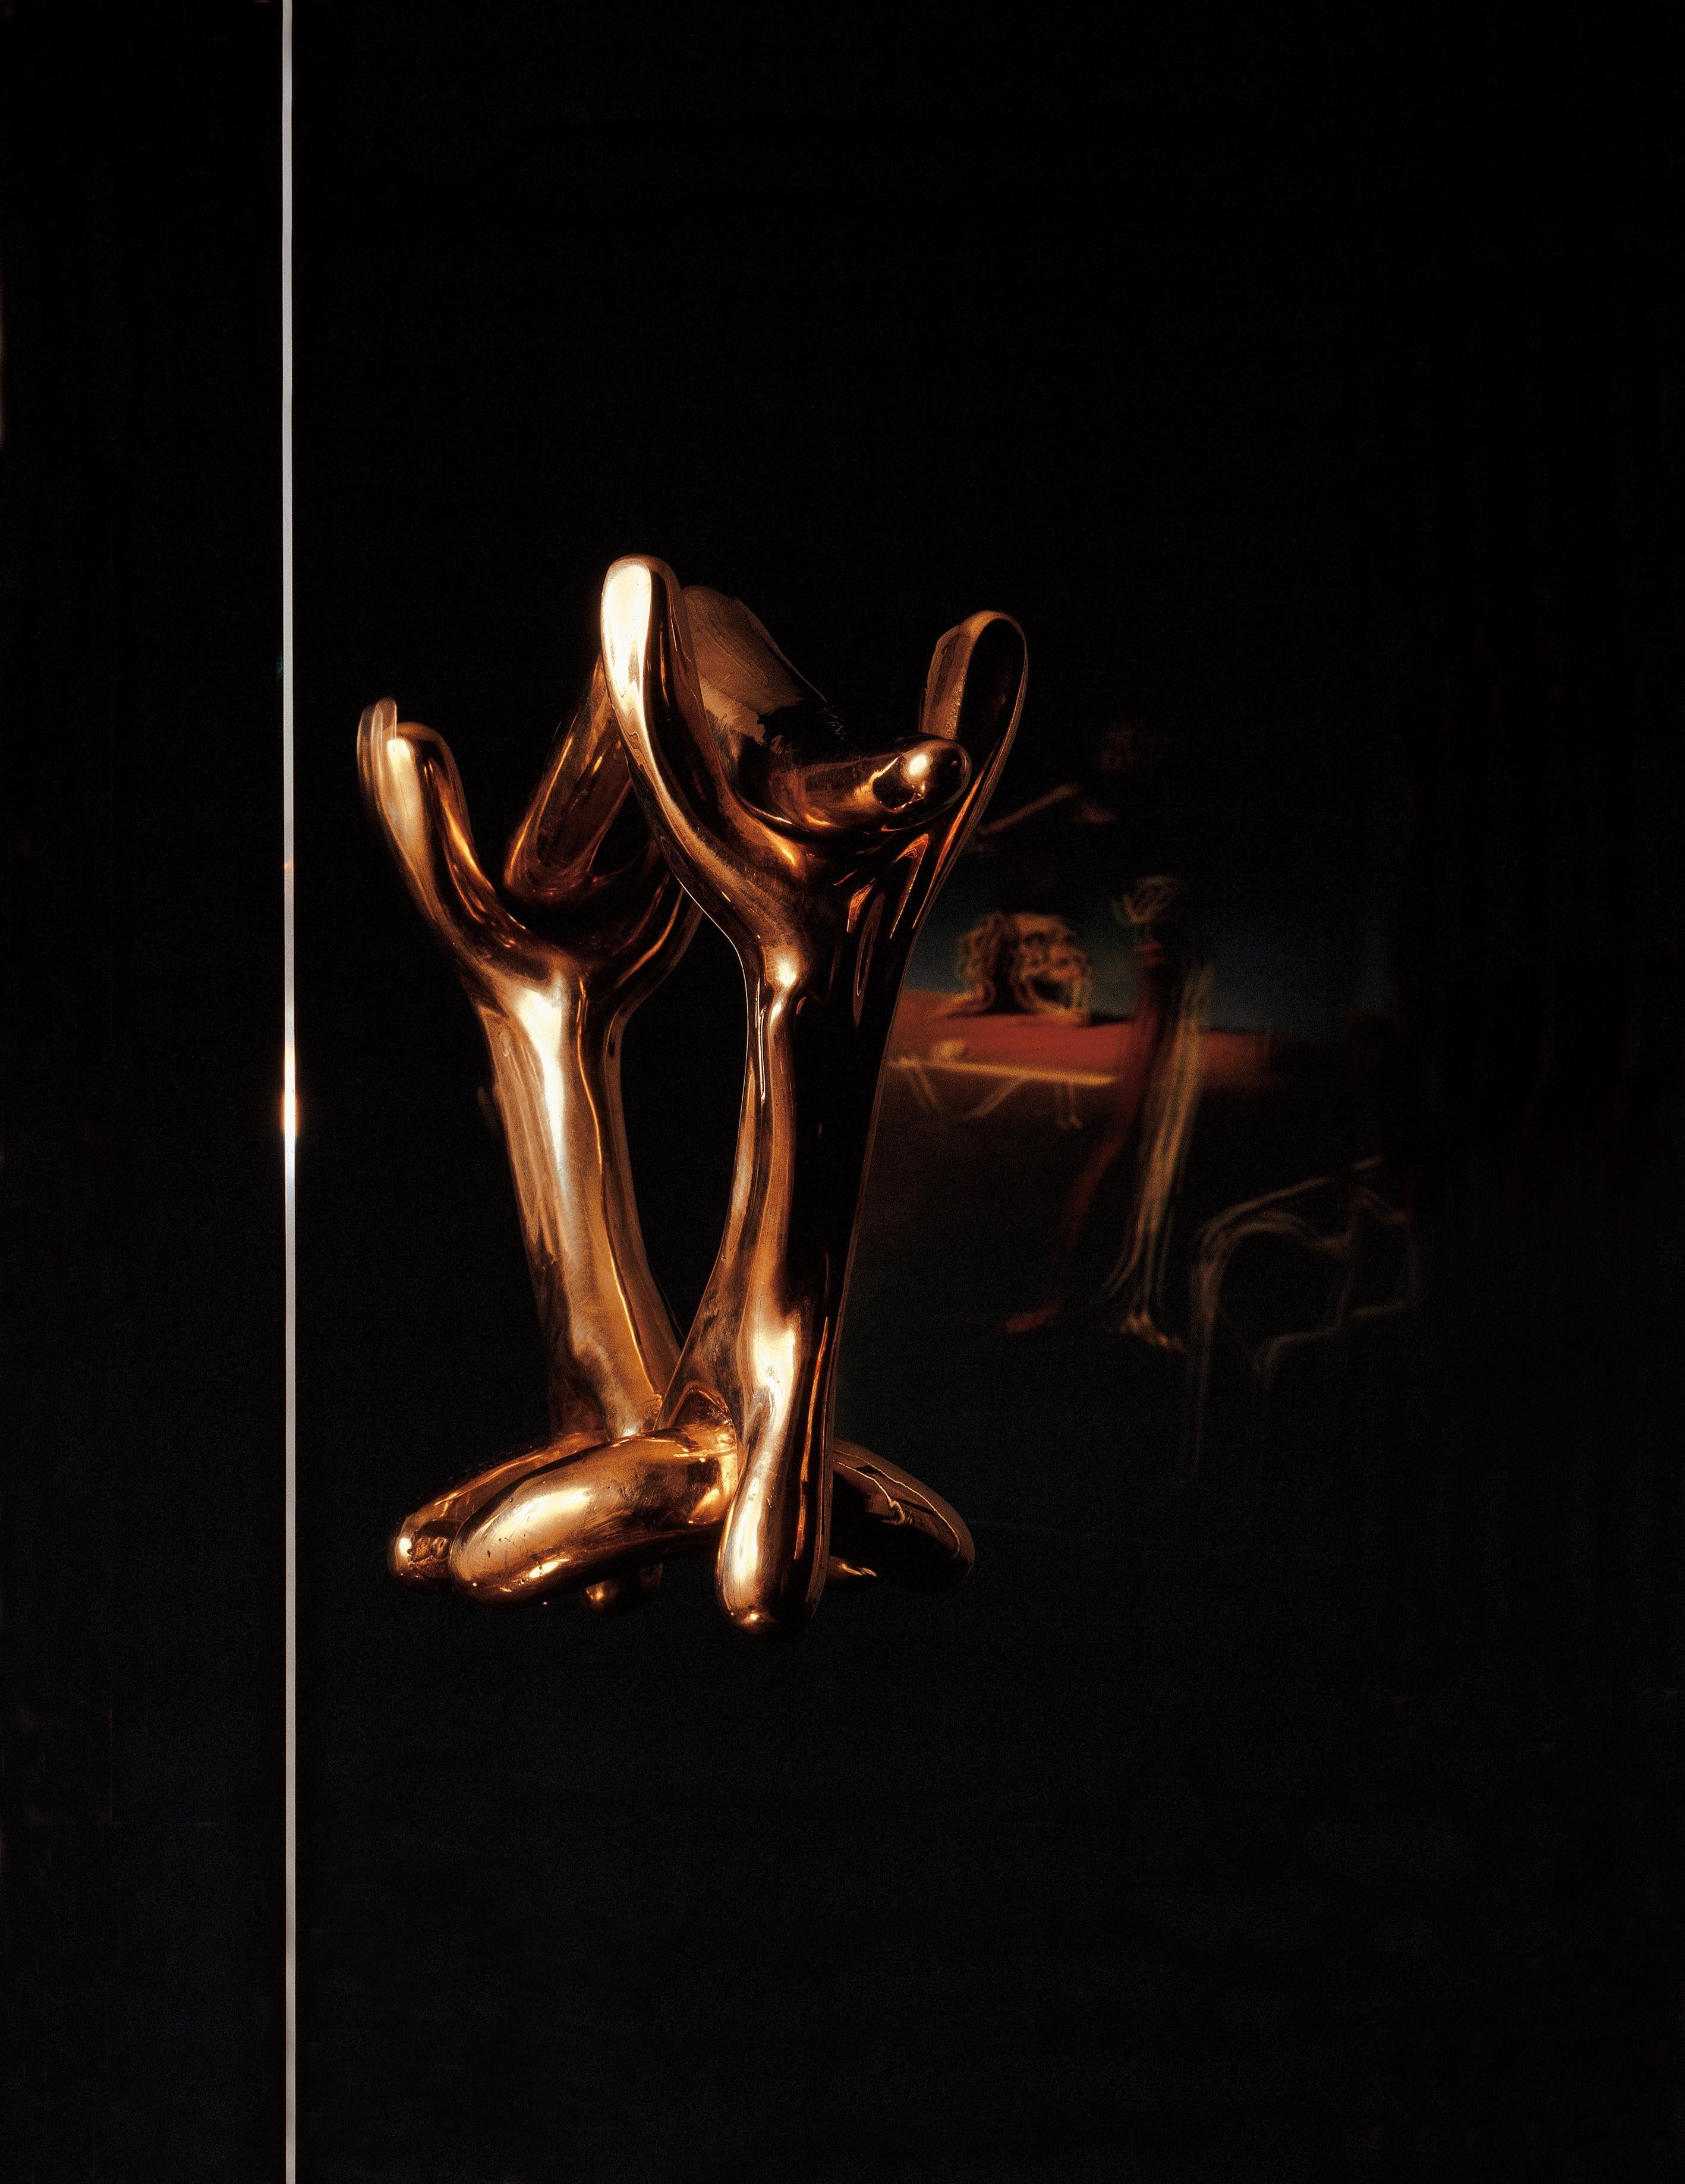 Three polished lacquered cast bronze pieces joined together.

During the ‘thirties in Paris, Salvador Dalí surrounded himself with a circle of friends involved in the application of art to varied disciplines, above and beyond the study of pure